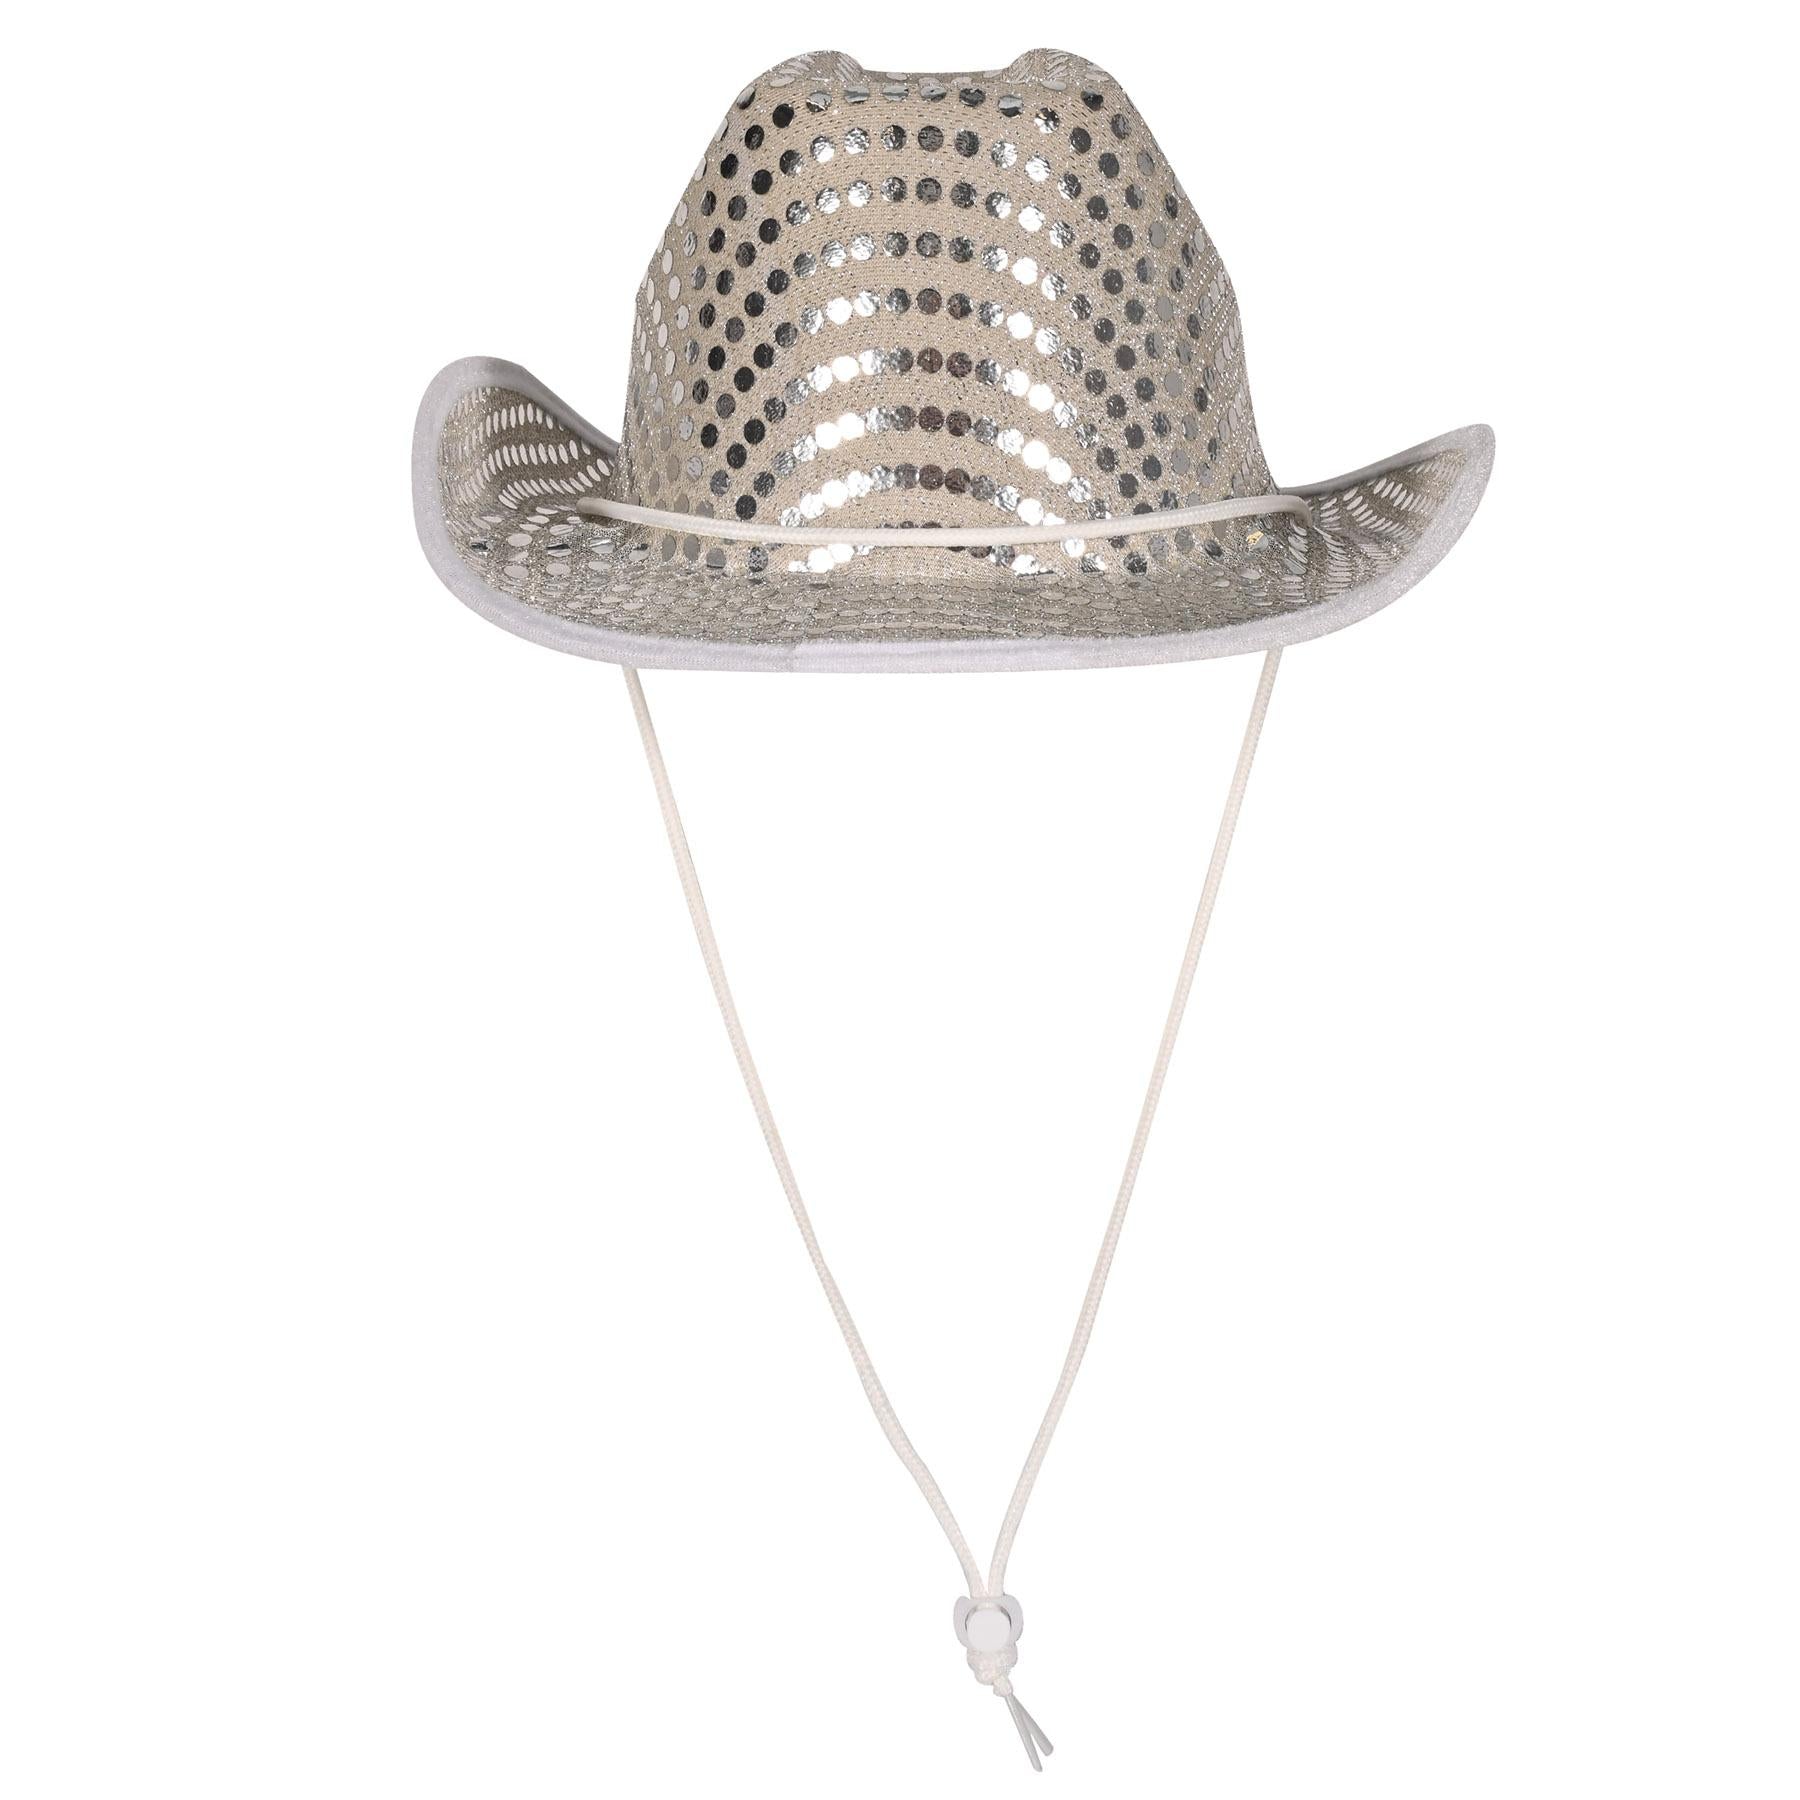 Sequined Cowboy Hat in Silver - Western Fabric Hat